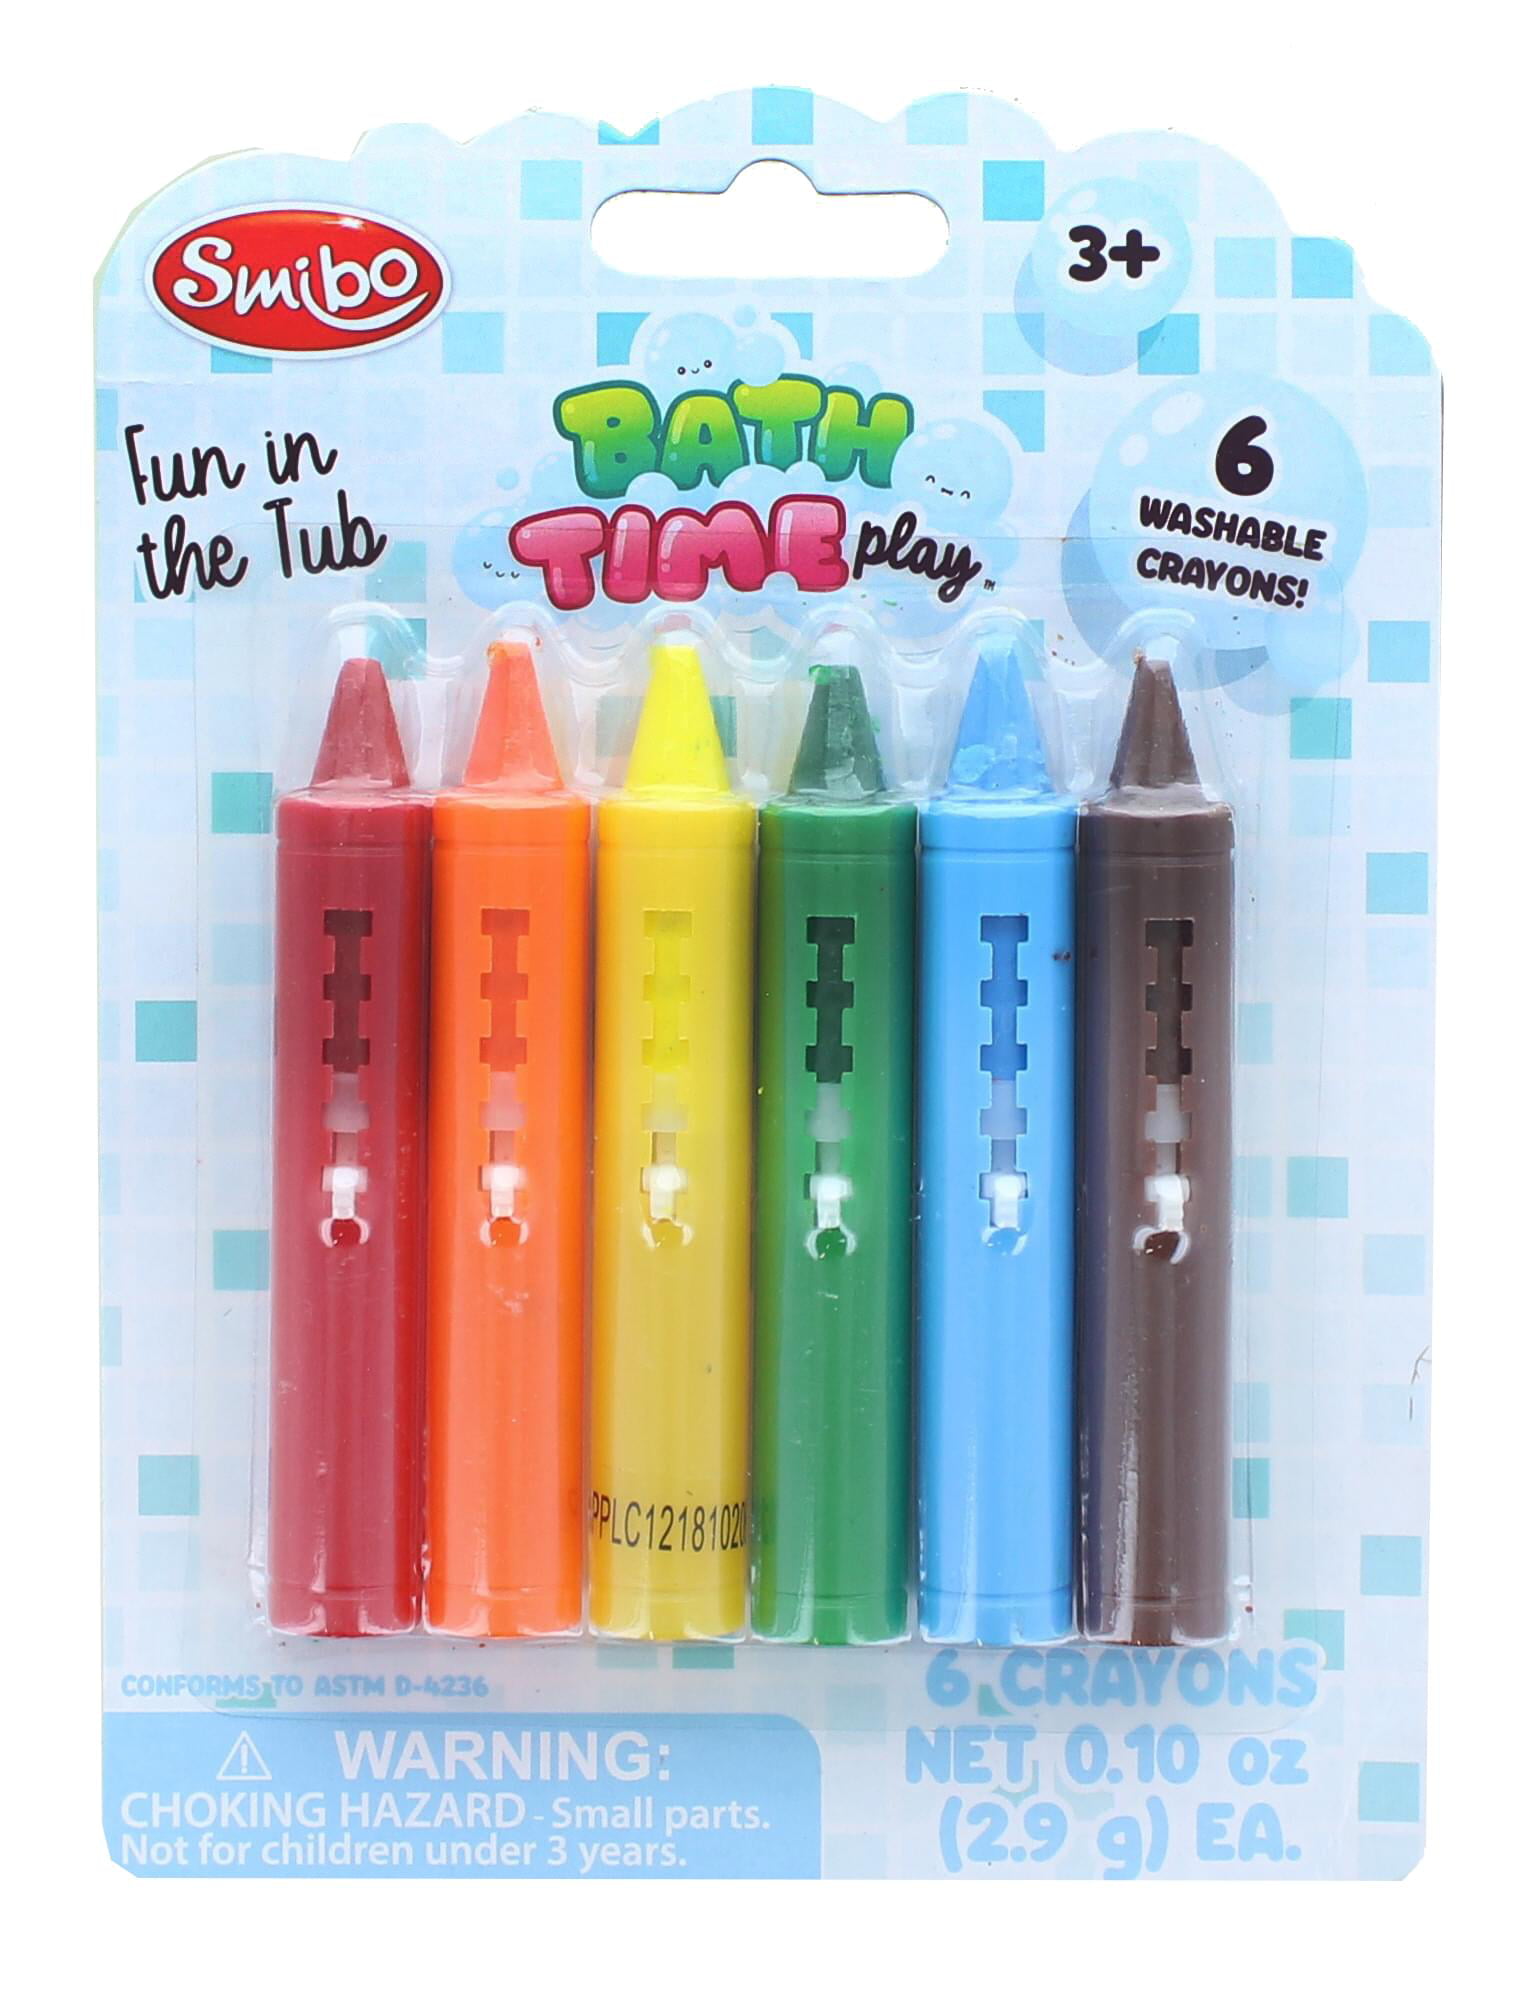 Bath Crayons Super Set - Set of 12 Draw in The Tub Colors with Bathtub Mesh Bag